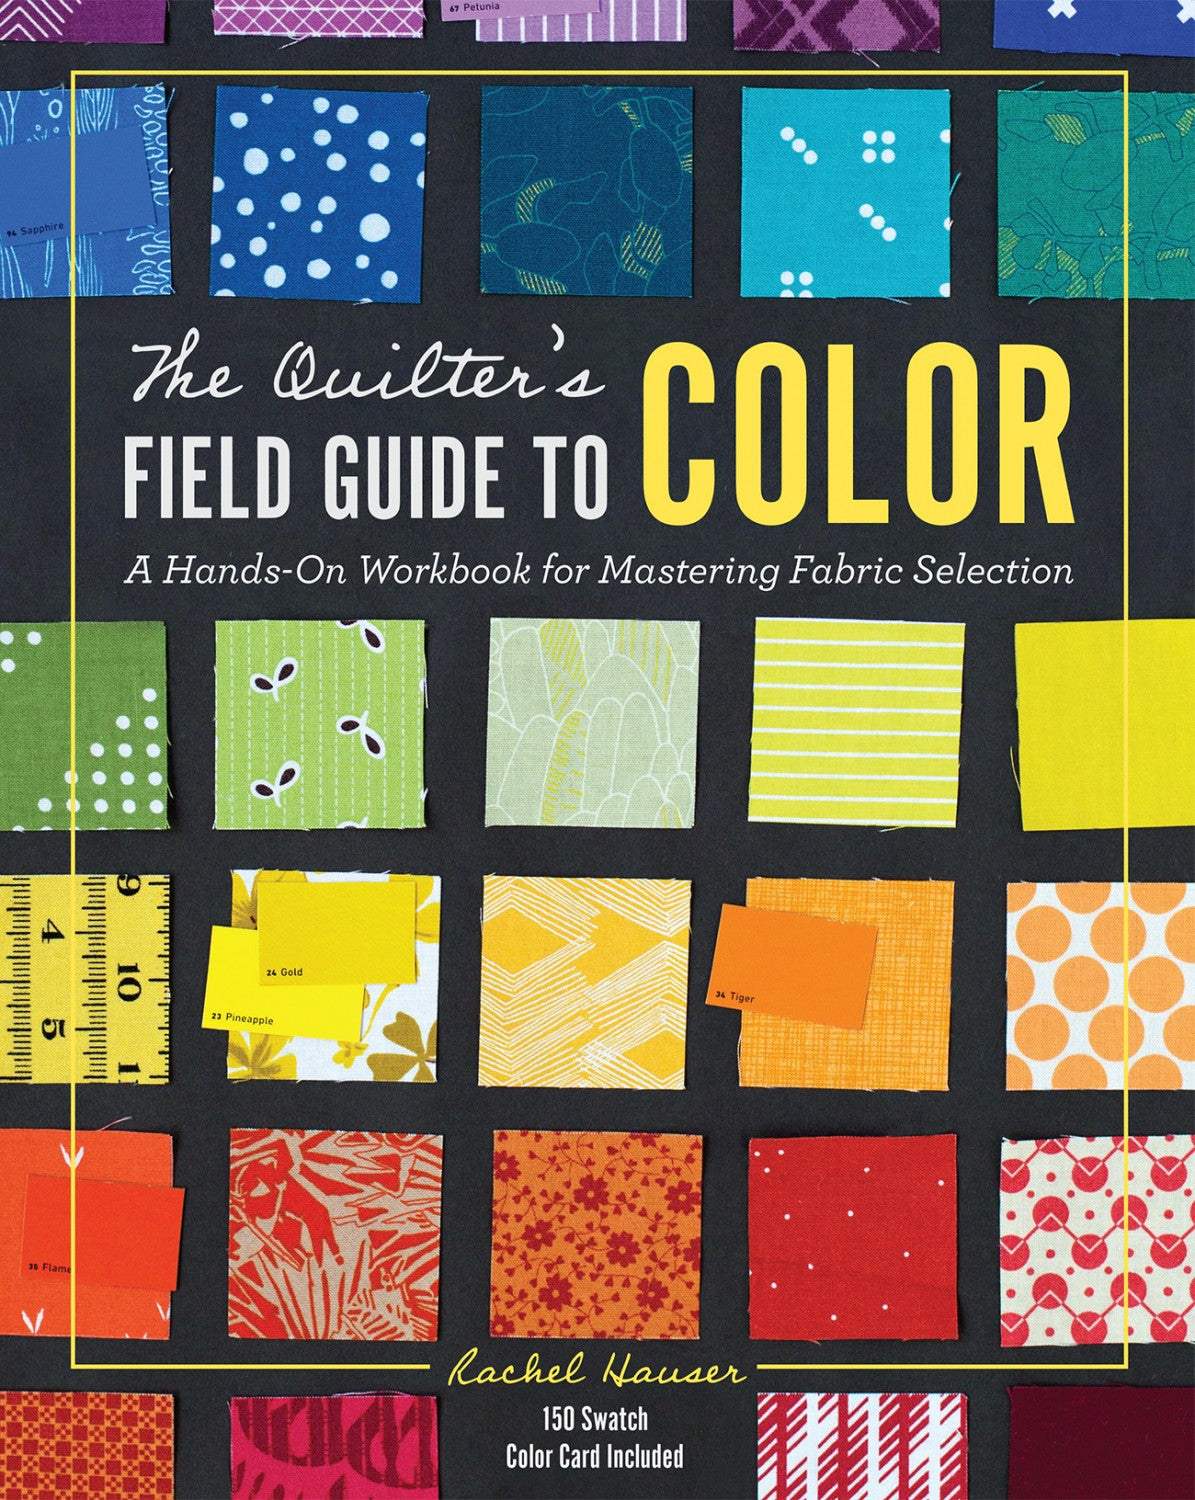 The Quilter's Field Guide to Color: A Hands-On Workbook for Mastering Fabric Selection